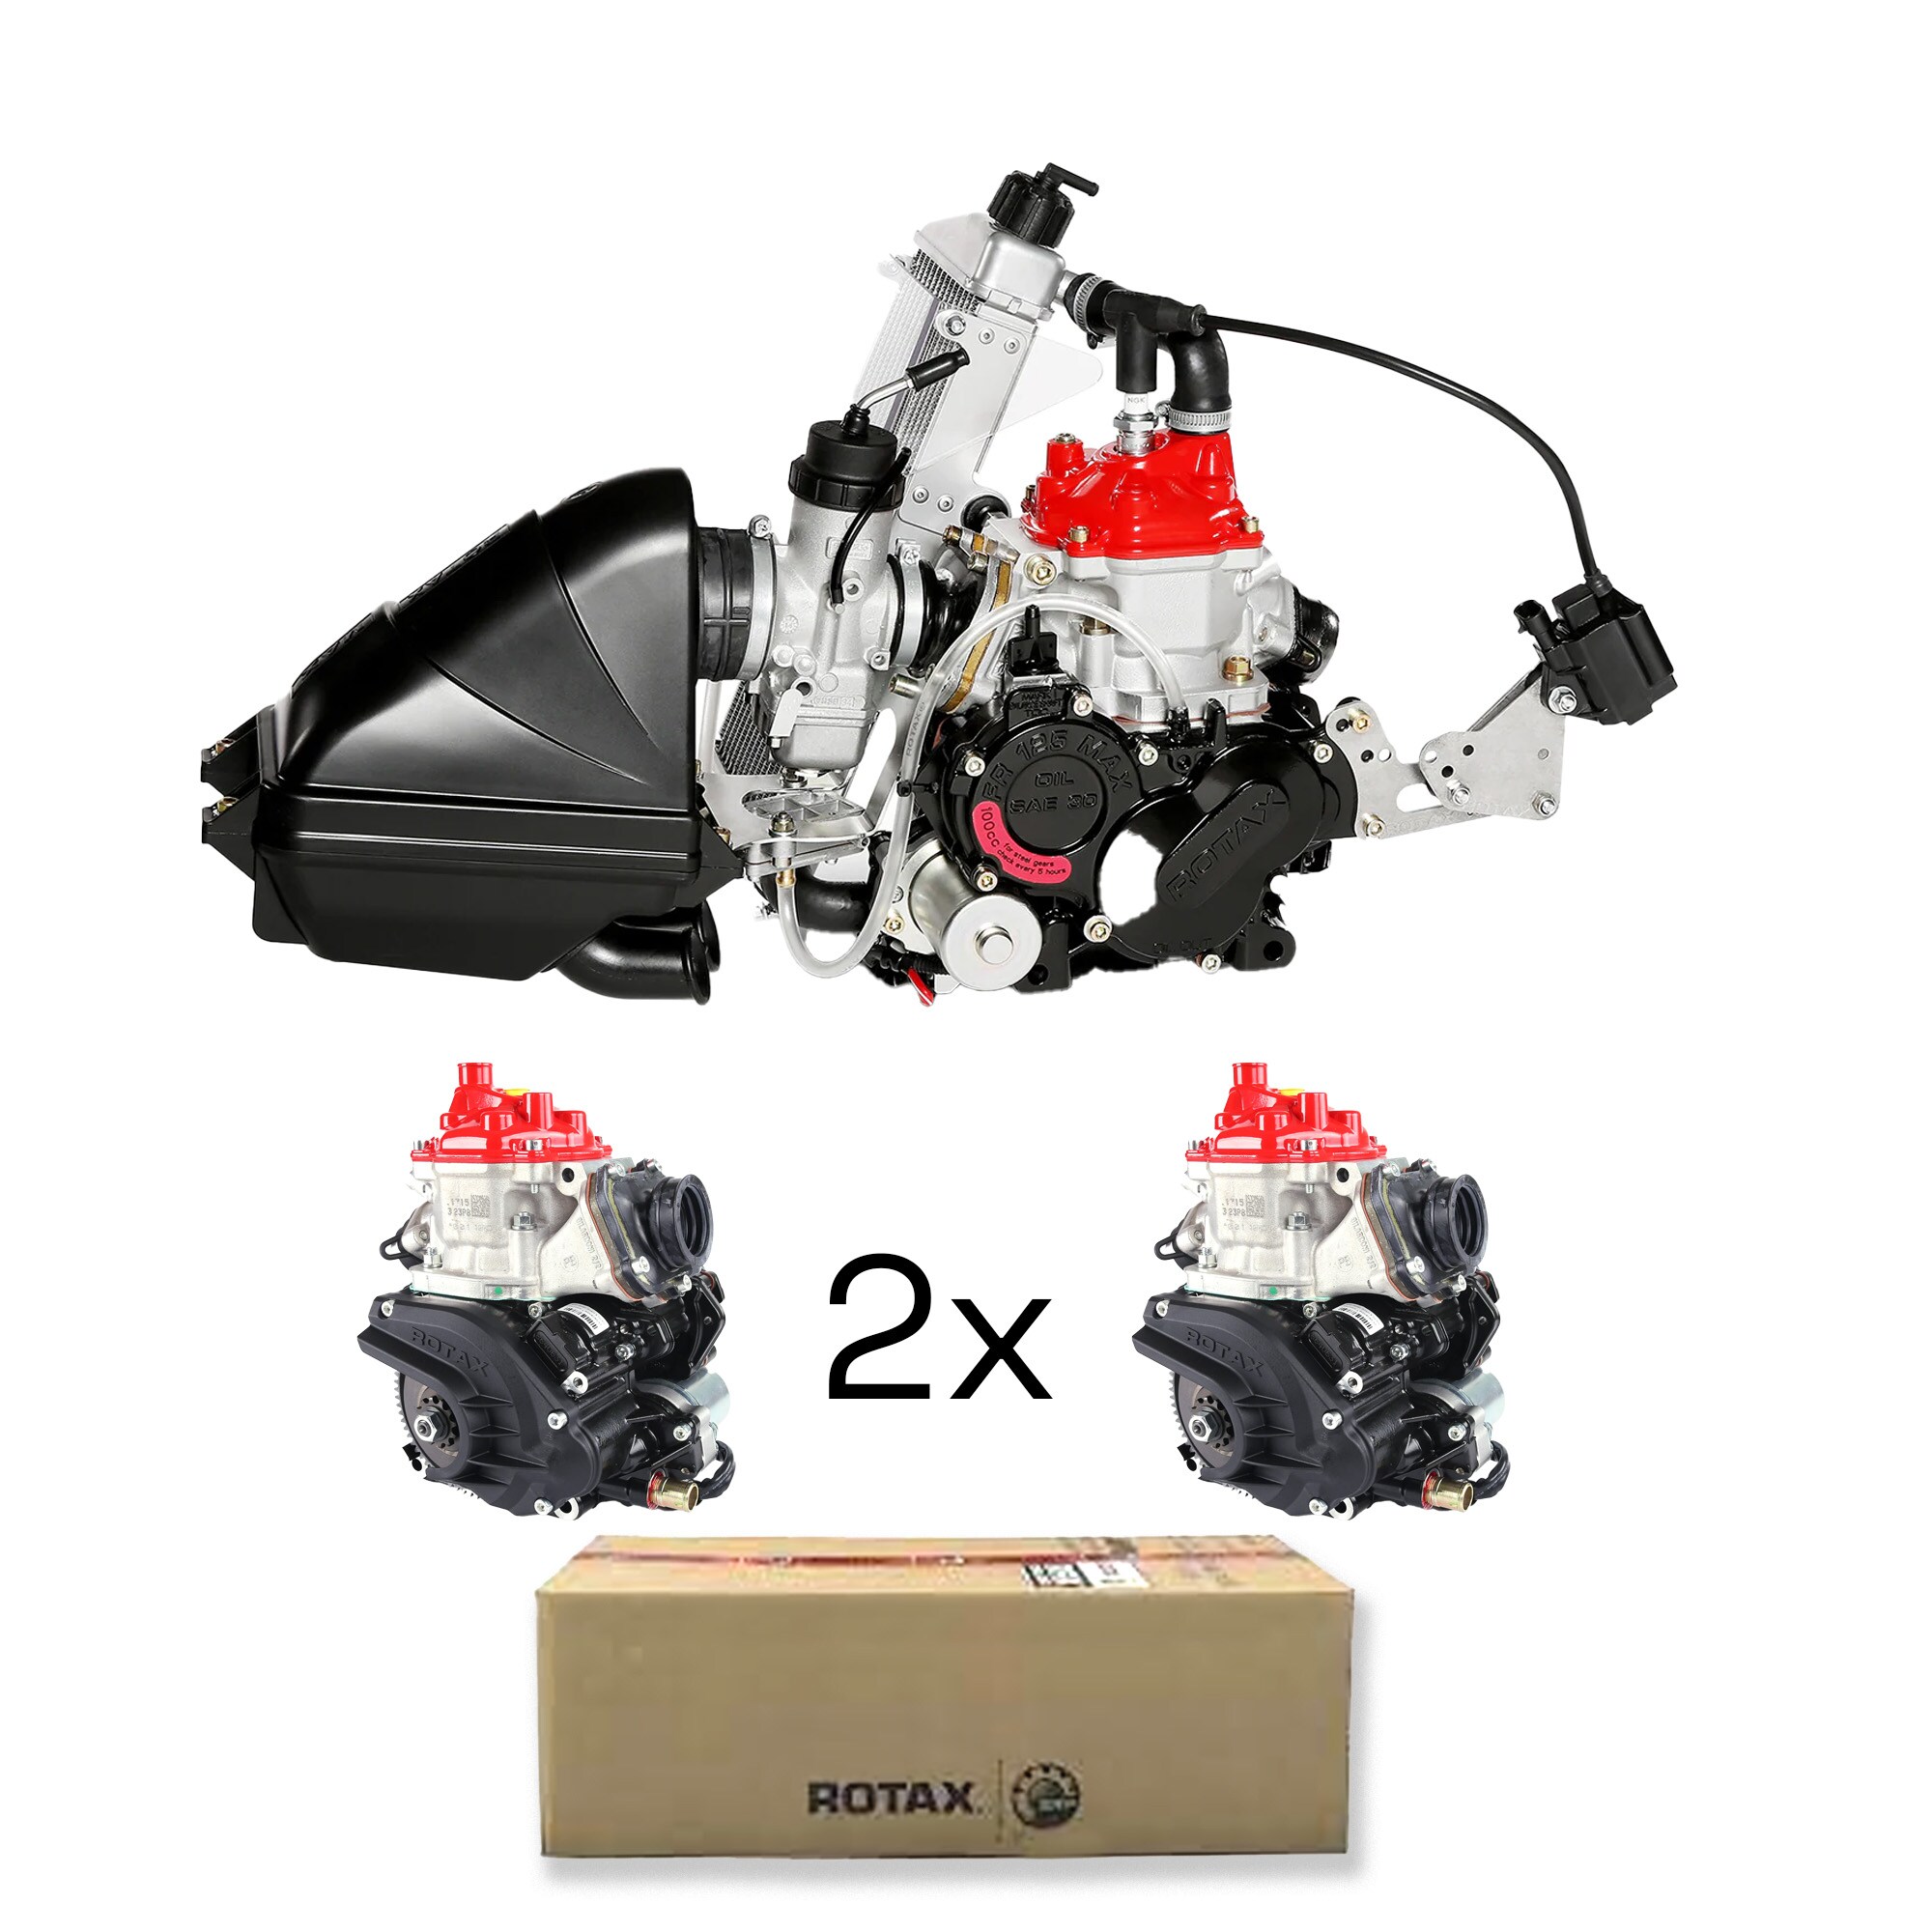 Rotax 125 Max Junior Race Package 2 x engine + 1 x Accessory box